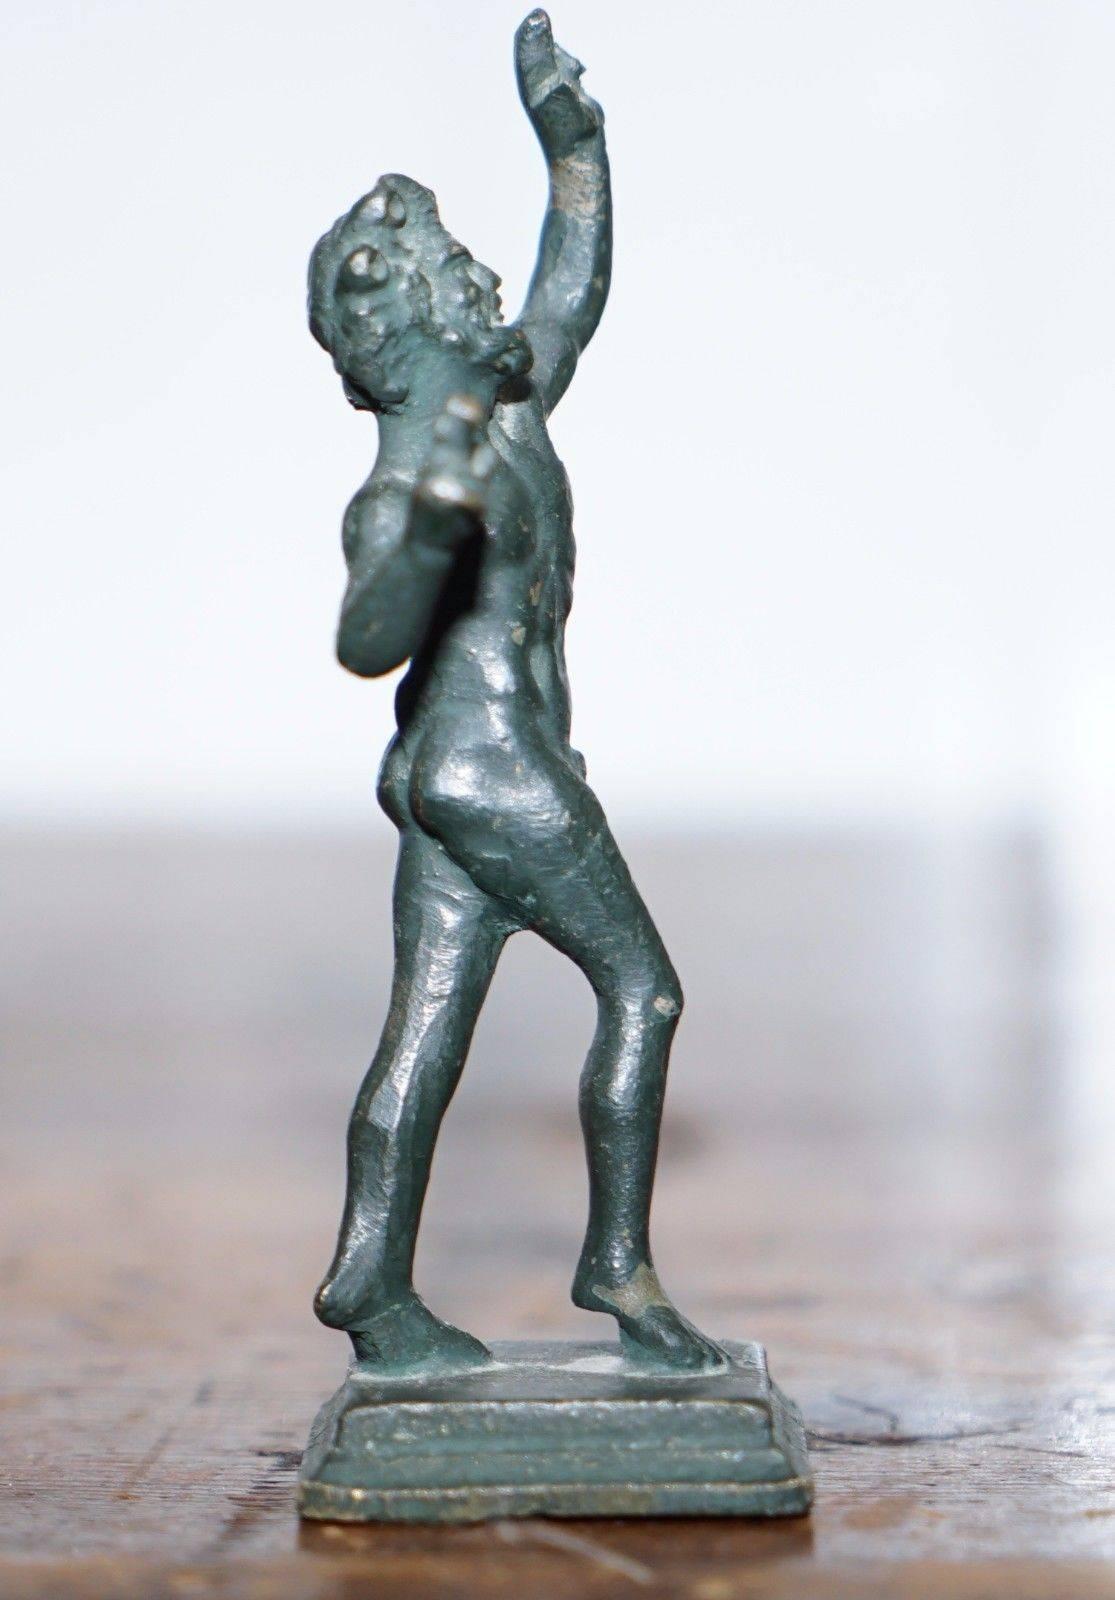 19th Century Rare Miniature Very Early Bronze Statue of the Dancing Faun Grand Tour Piece